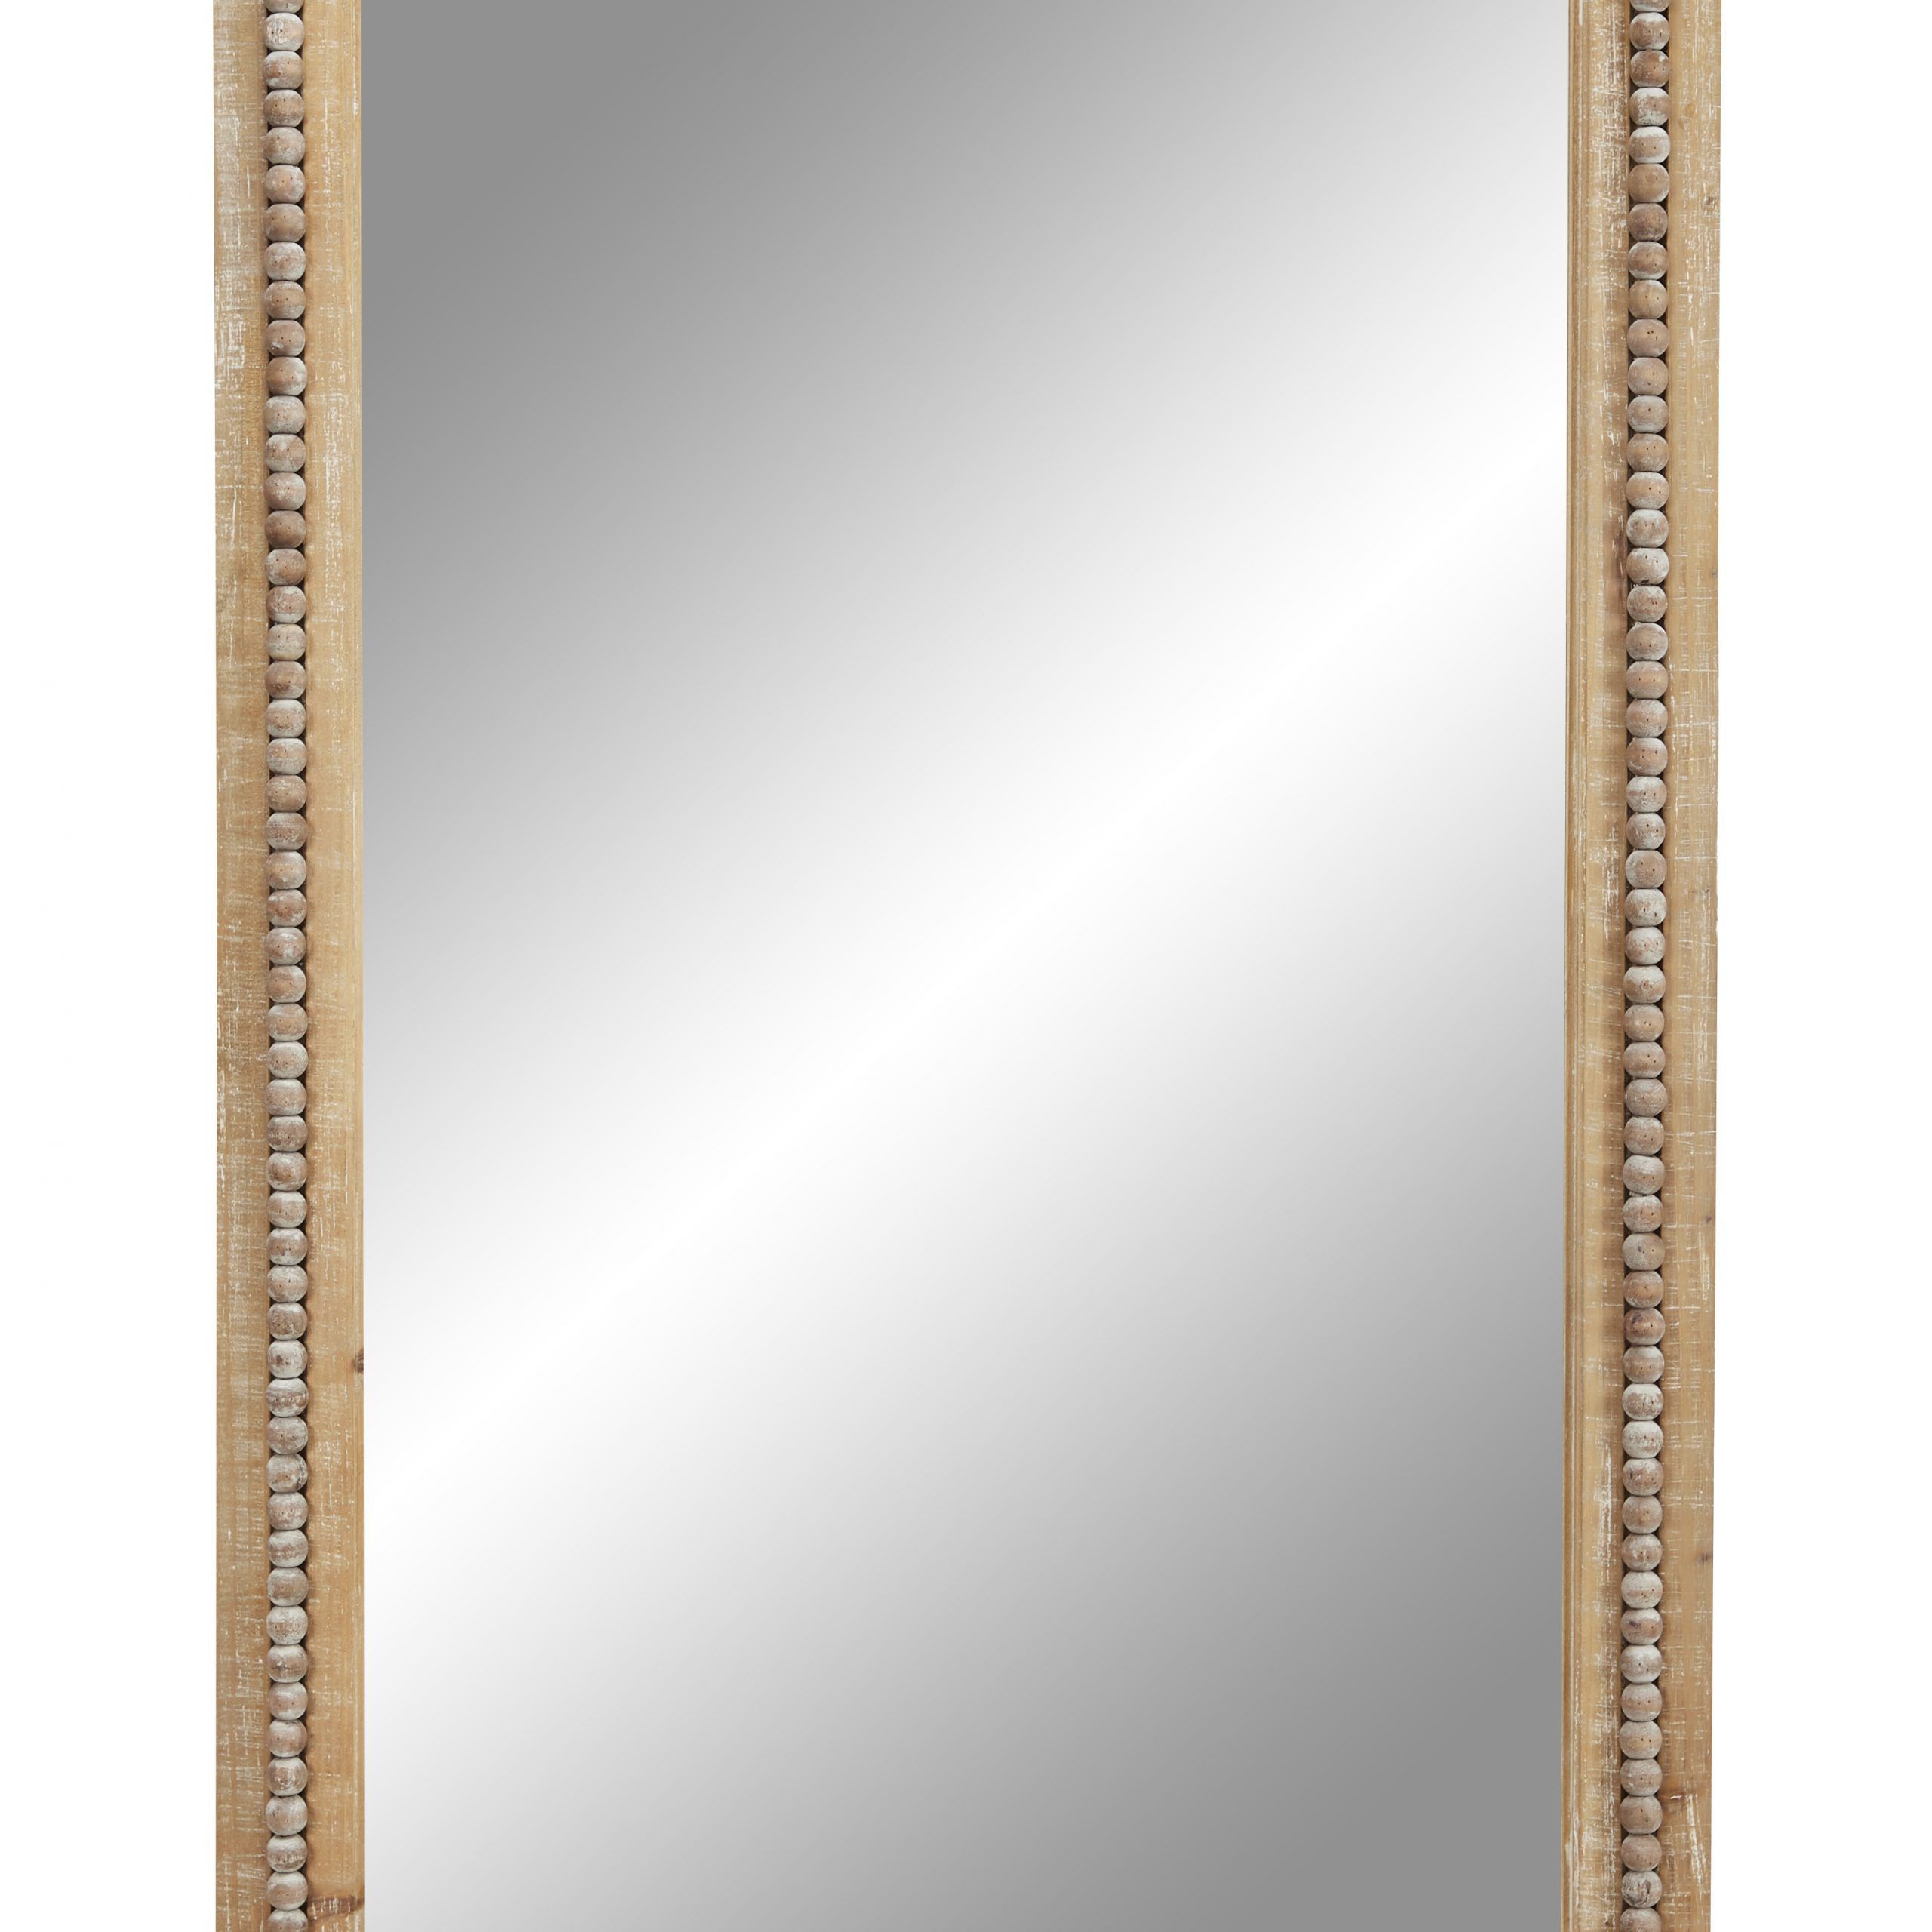 Decmode Large Rectangular Whitewashed Wood Wall Mirror W/ Decorative Pertaining To Bracelet Traditional Accent Mirrors (View 14 of 15)